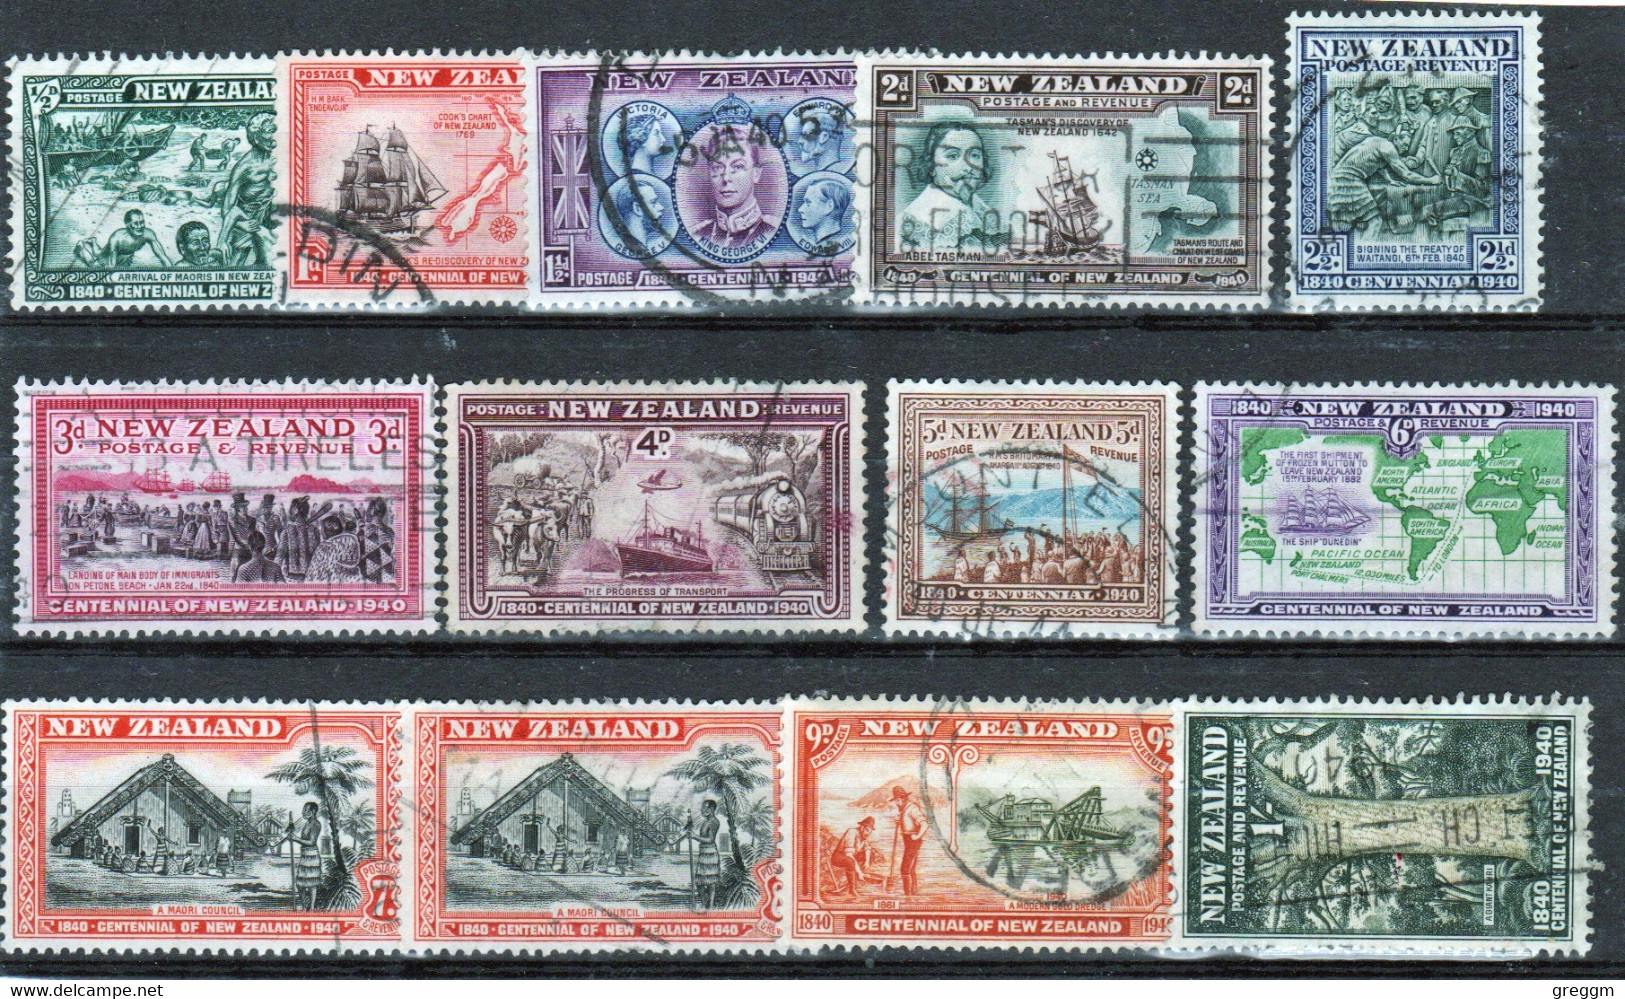 New Zealand Set Of Definitive Stamps From 1940 To Celebrate Centenary Of New Zealand In Fine Used Condition. - Gebraucht